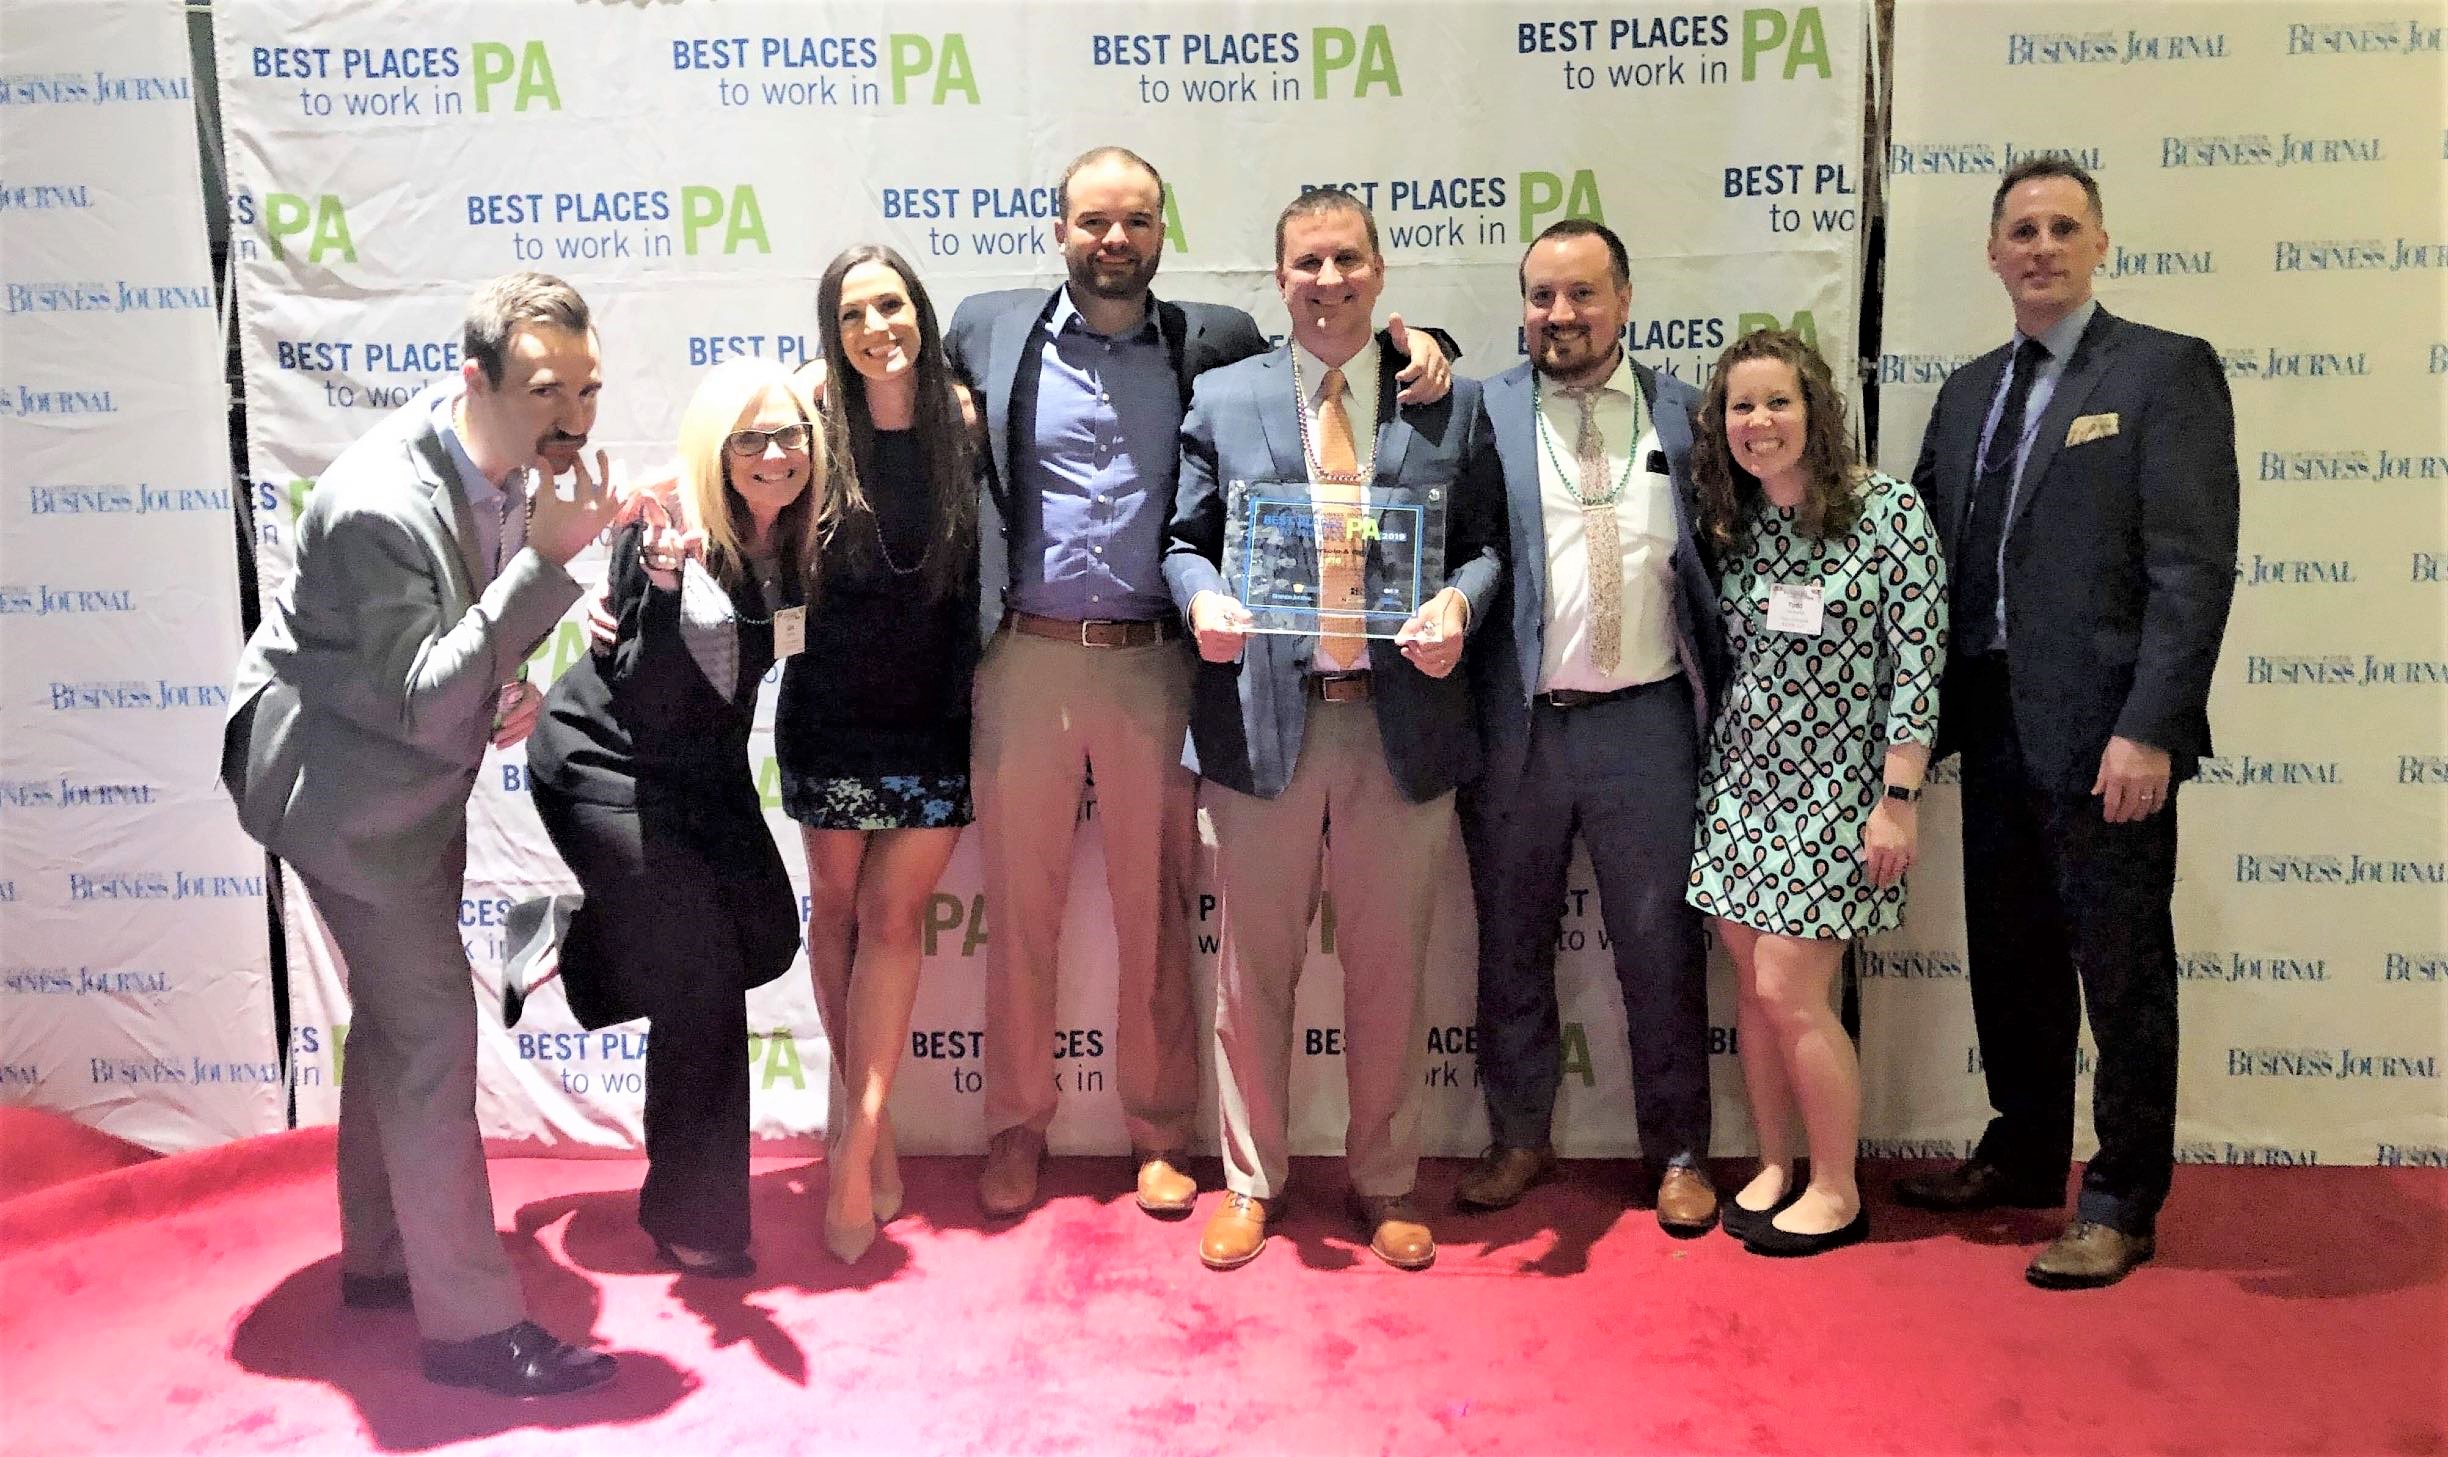 Firm Earns 16th Spot for Best Places to Work in PA